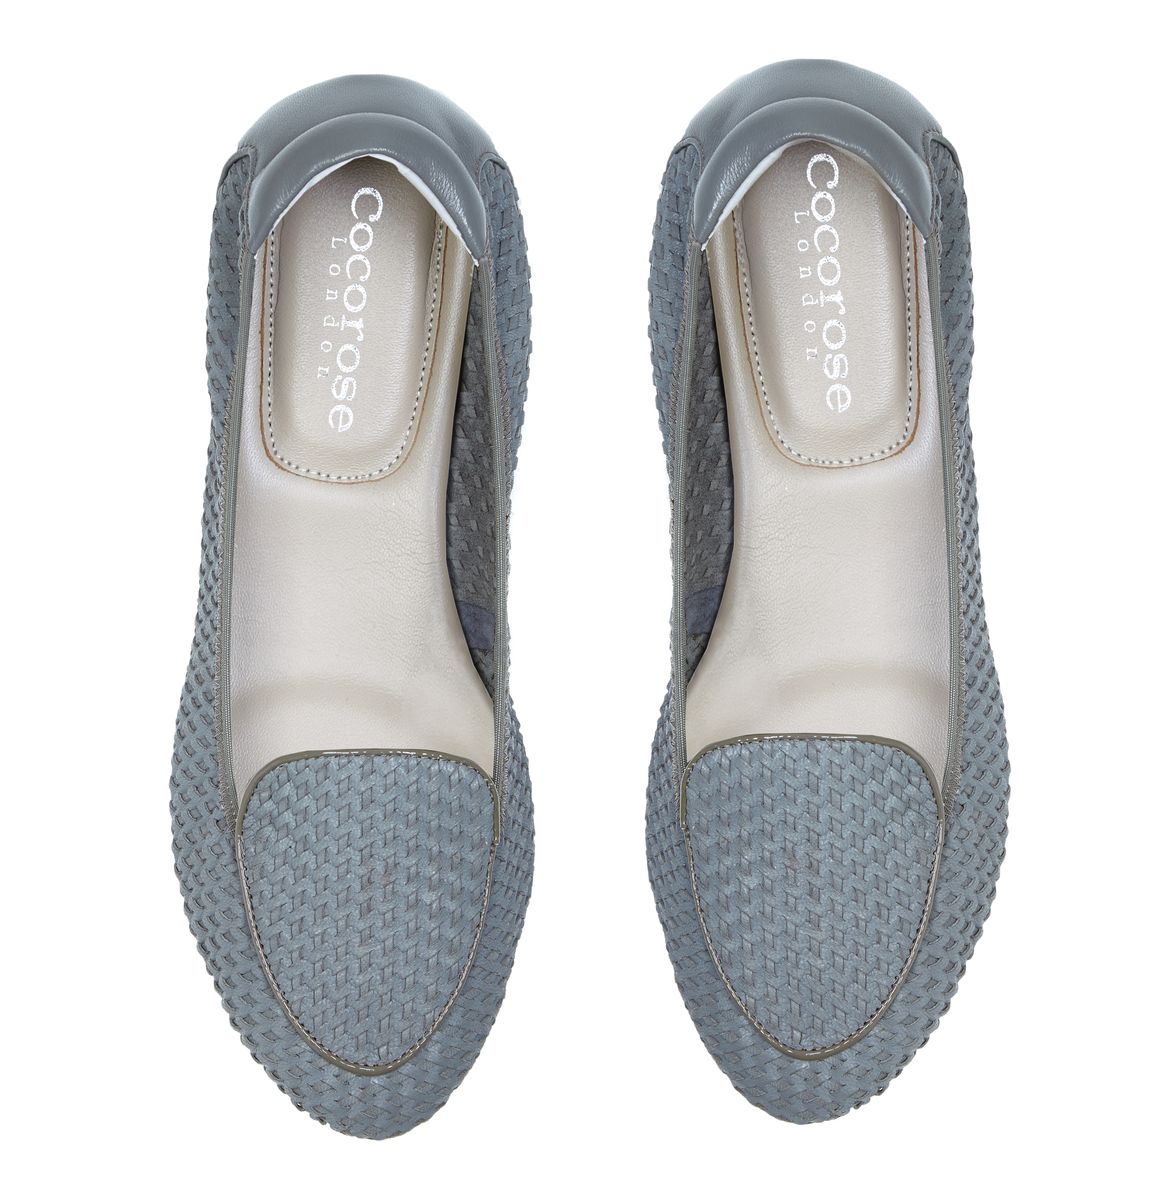 Cocorose London Grey woven leather loafers